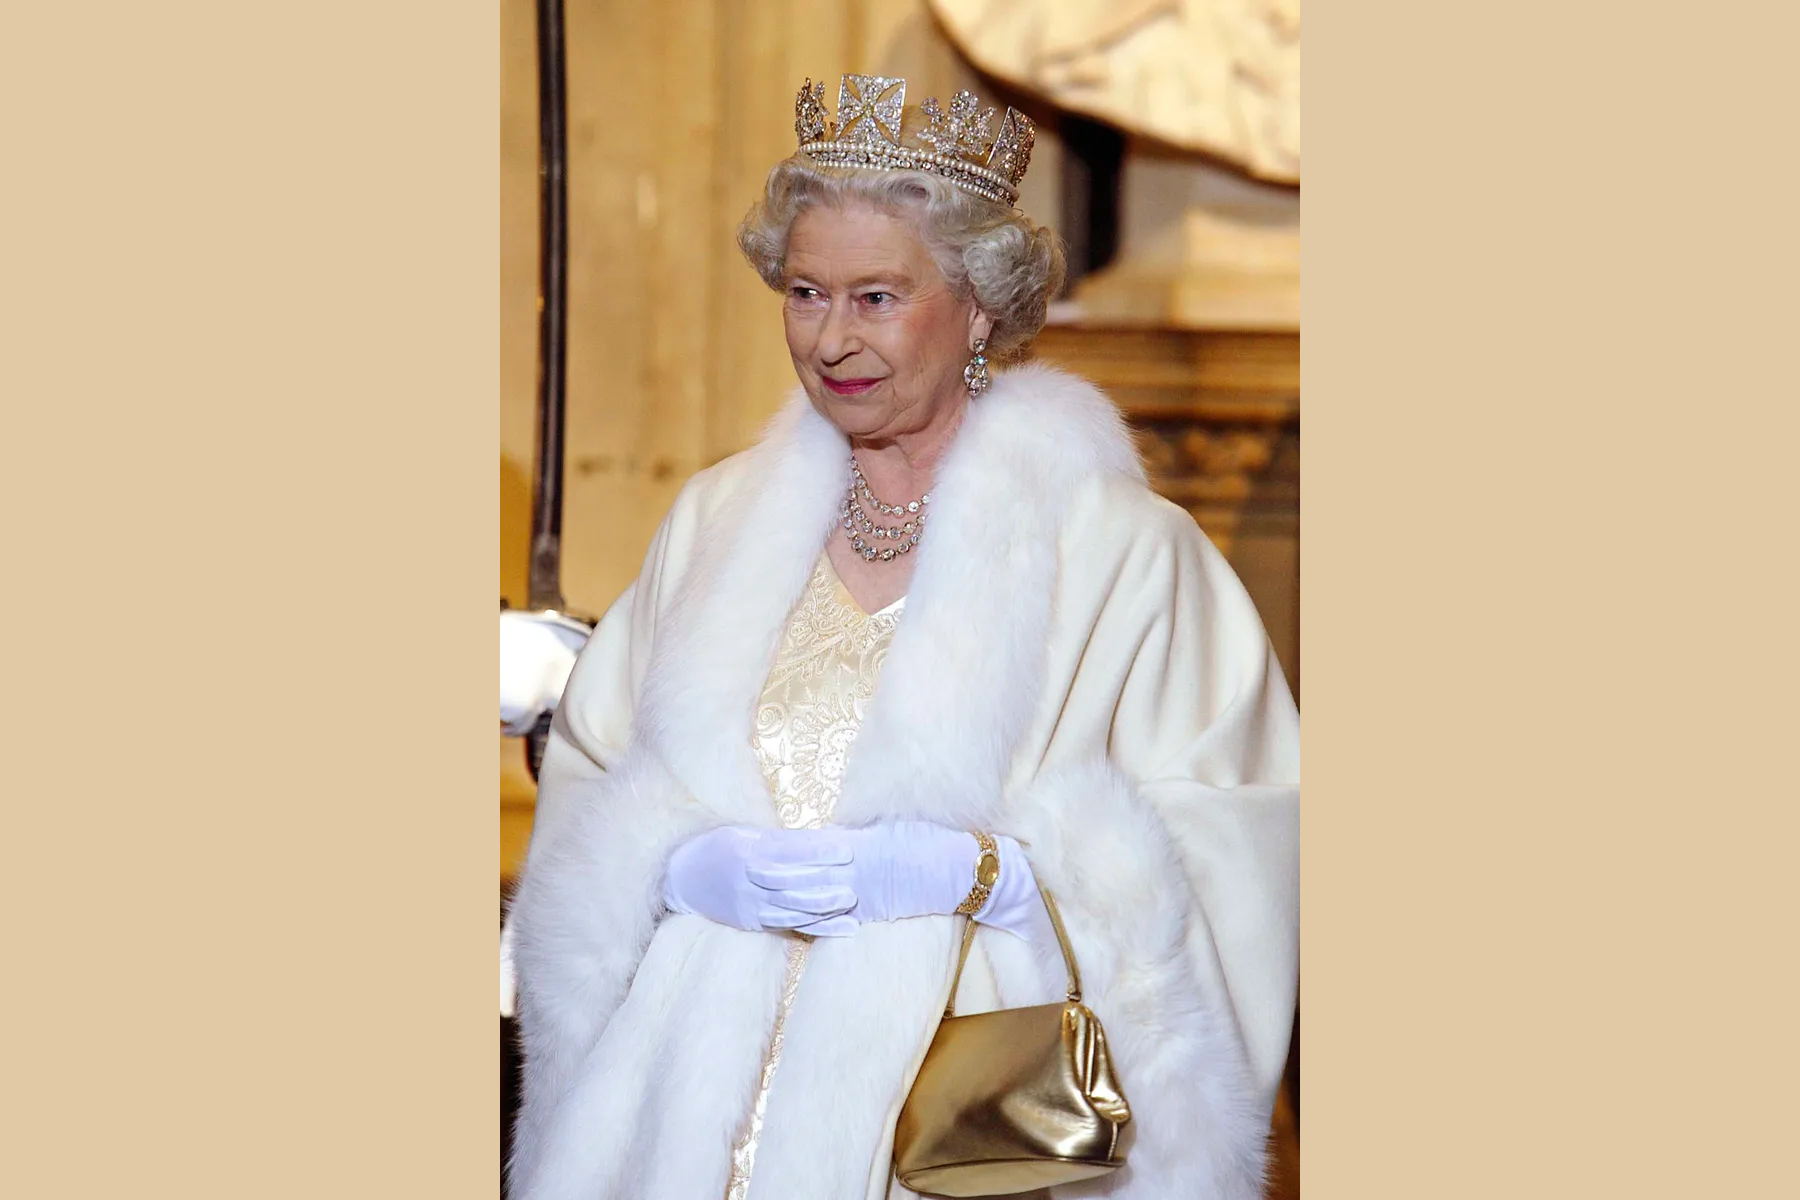 Queen Elizabeth II dressed in glorious attire and the State Diadem